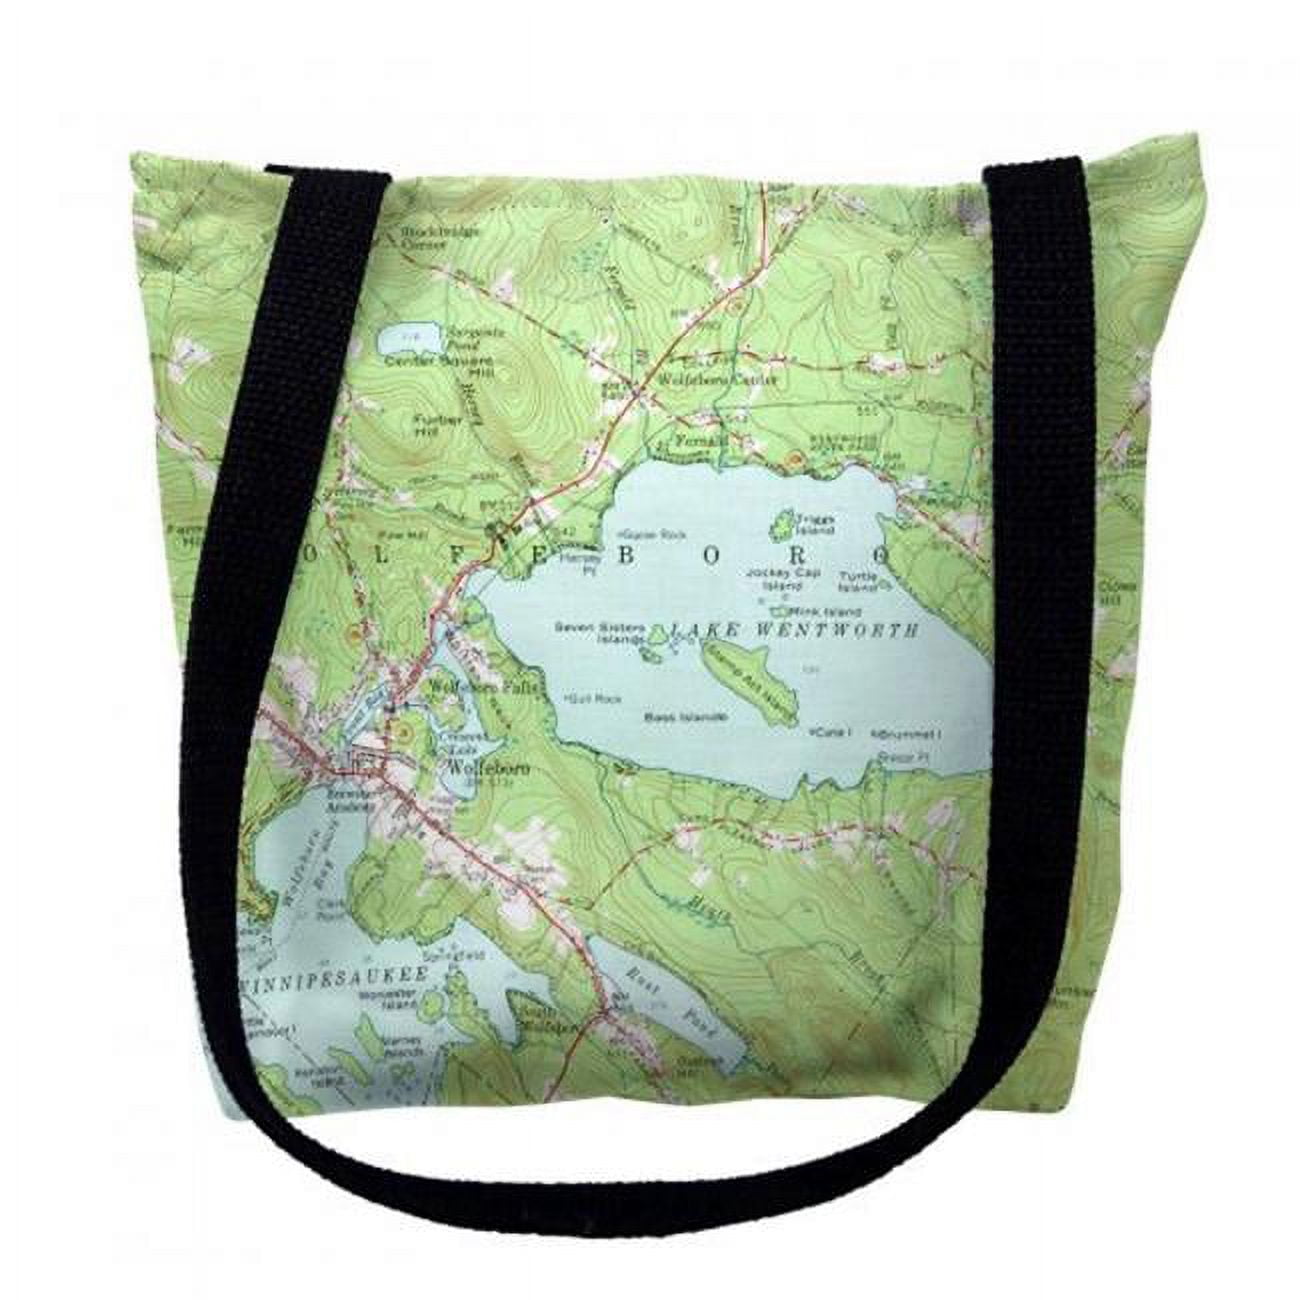 Ty654m 16 X 16 In. Lake Wentworth New Hampshire Nautical Map Tote Bag - Medium